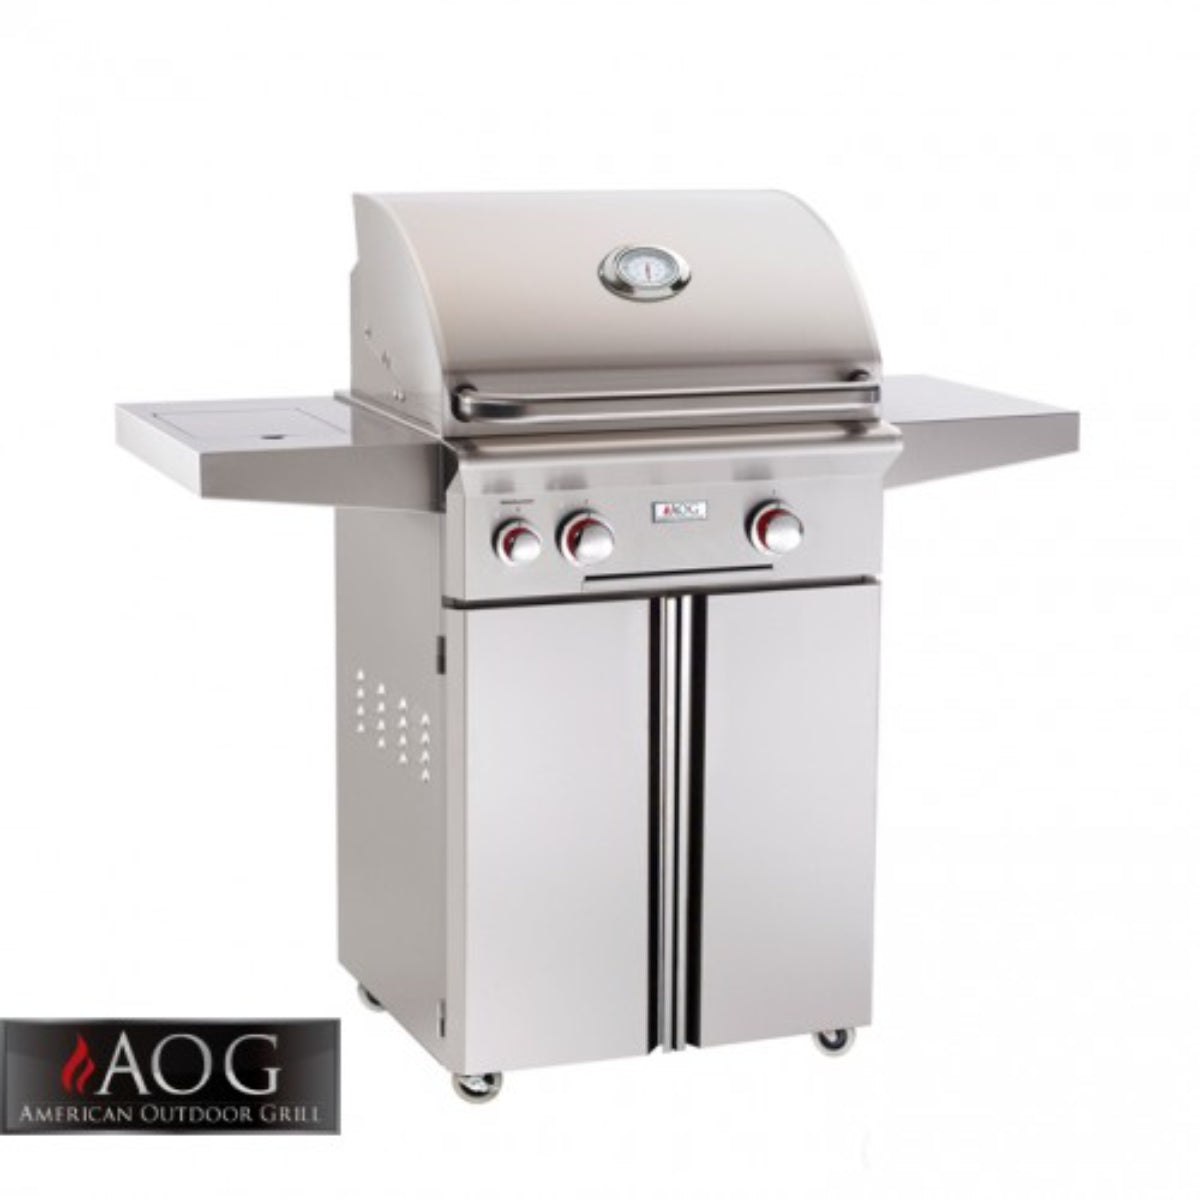 American Outdoor Grill 24PCT-00SP 24" T Series Portable Grill - Upper Livin